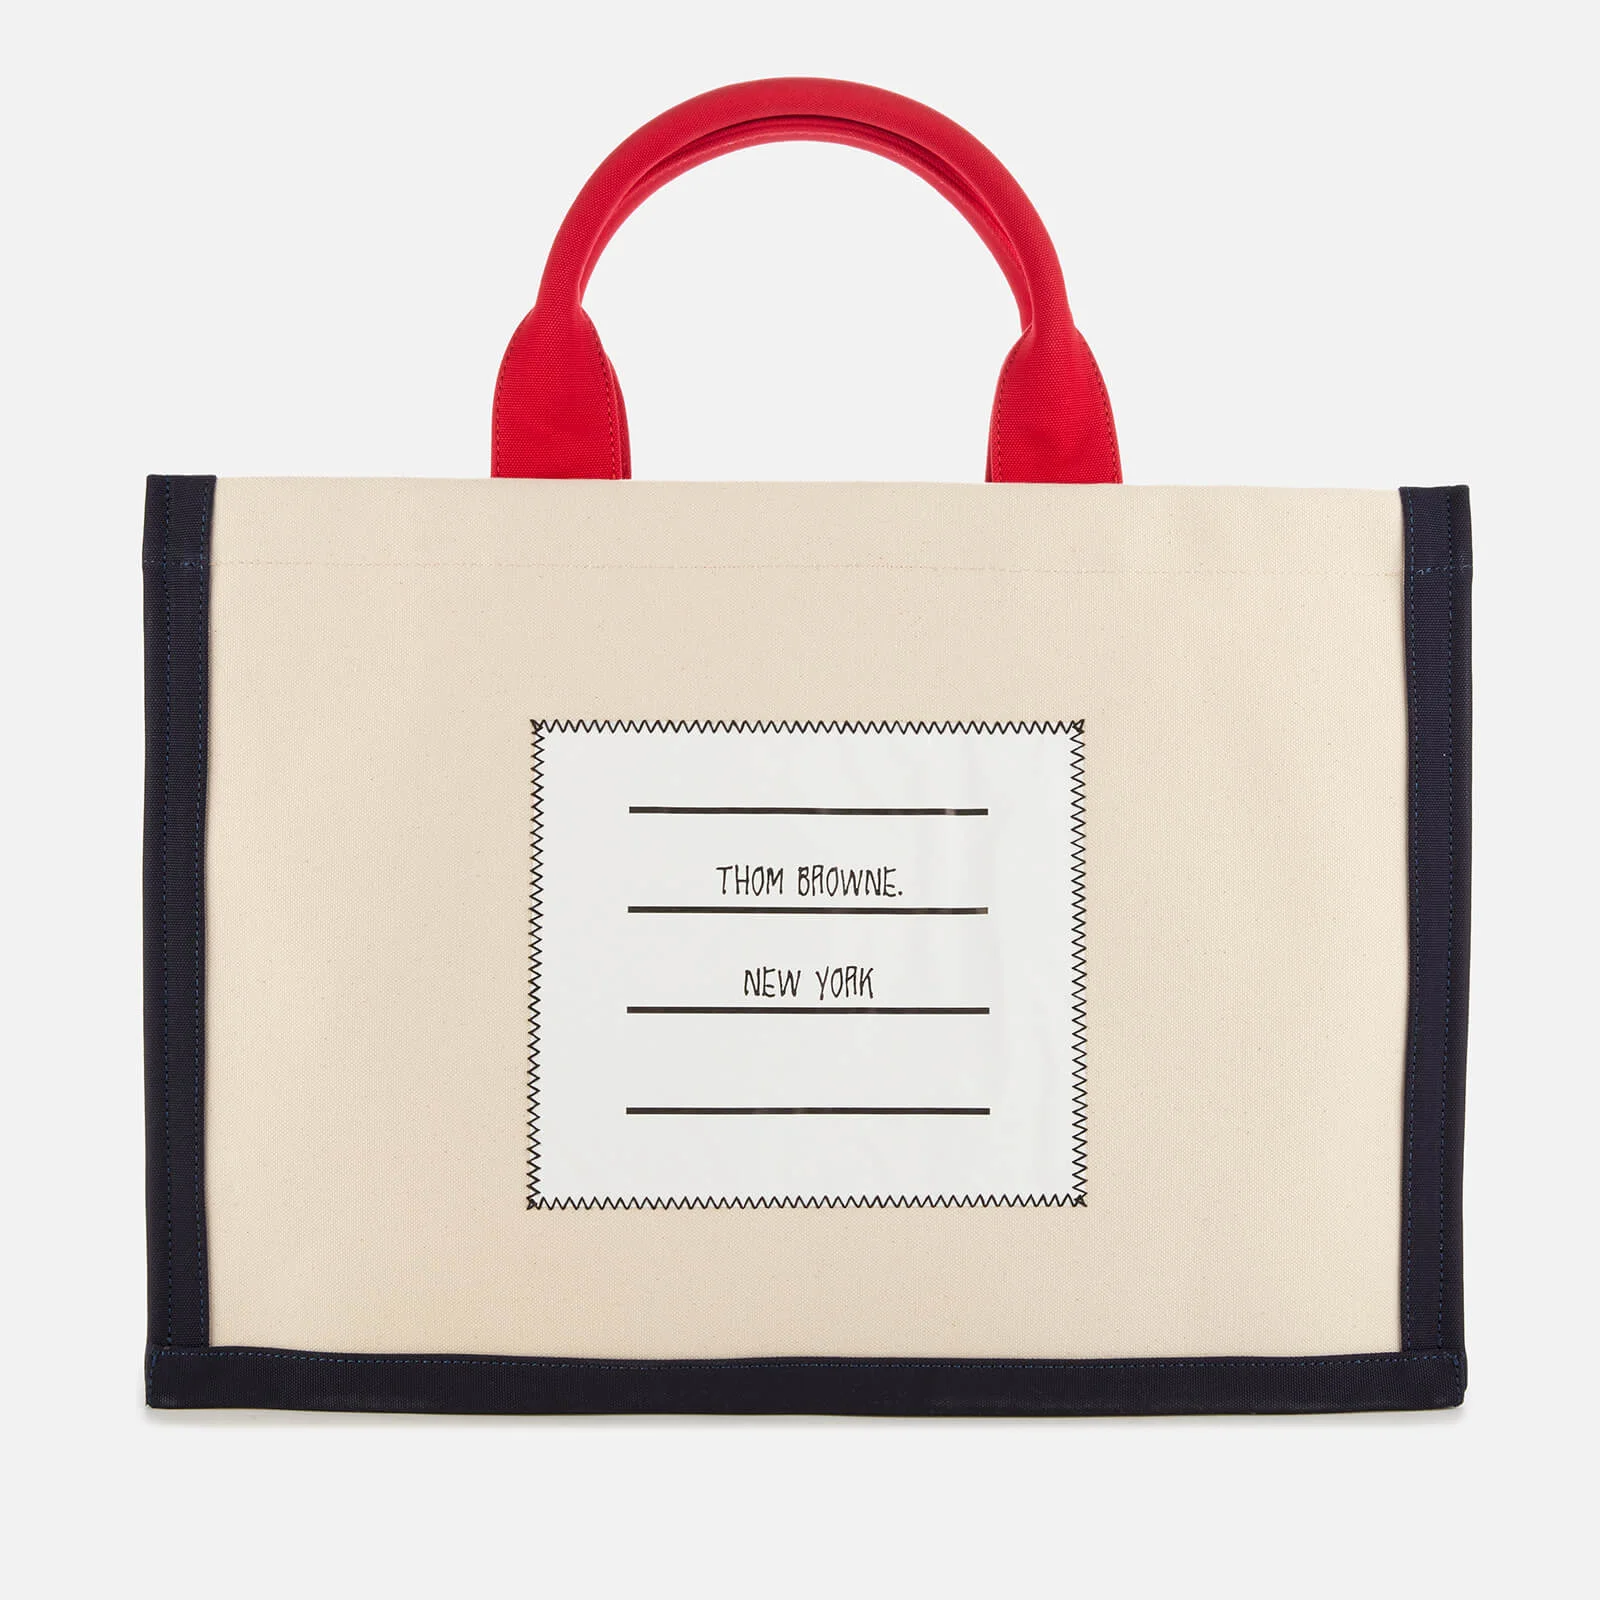 Thom Browne Women's Cotton Canvas Squared Tote Bag - Off White Image 1